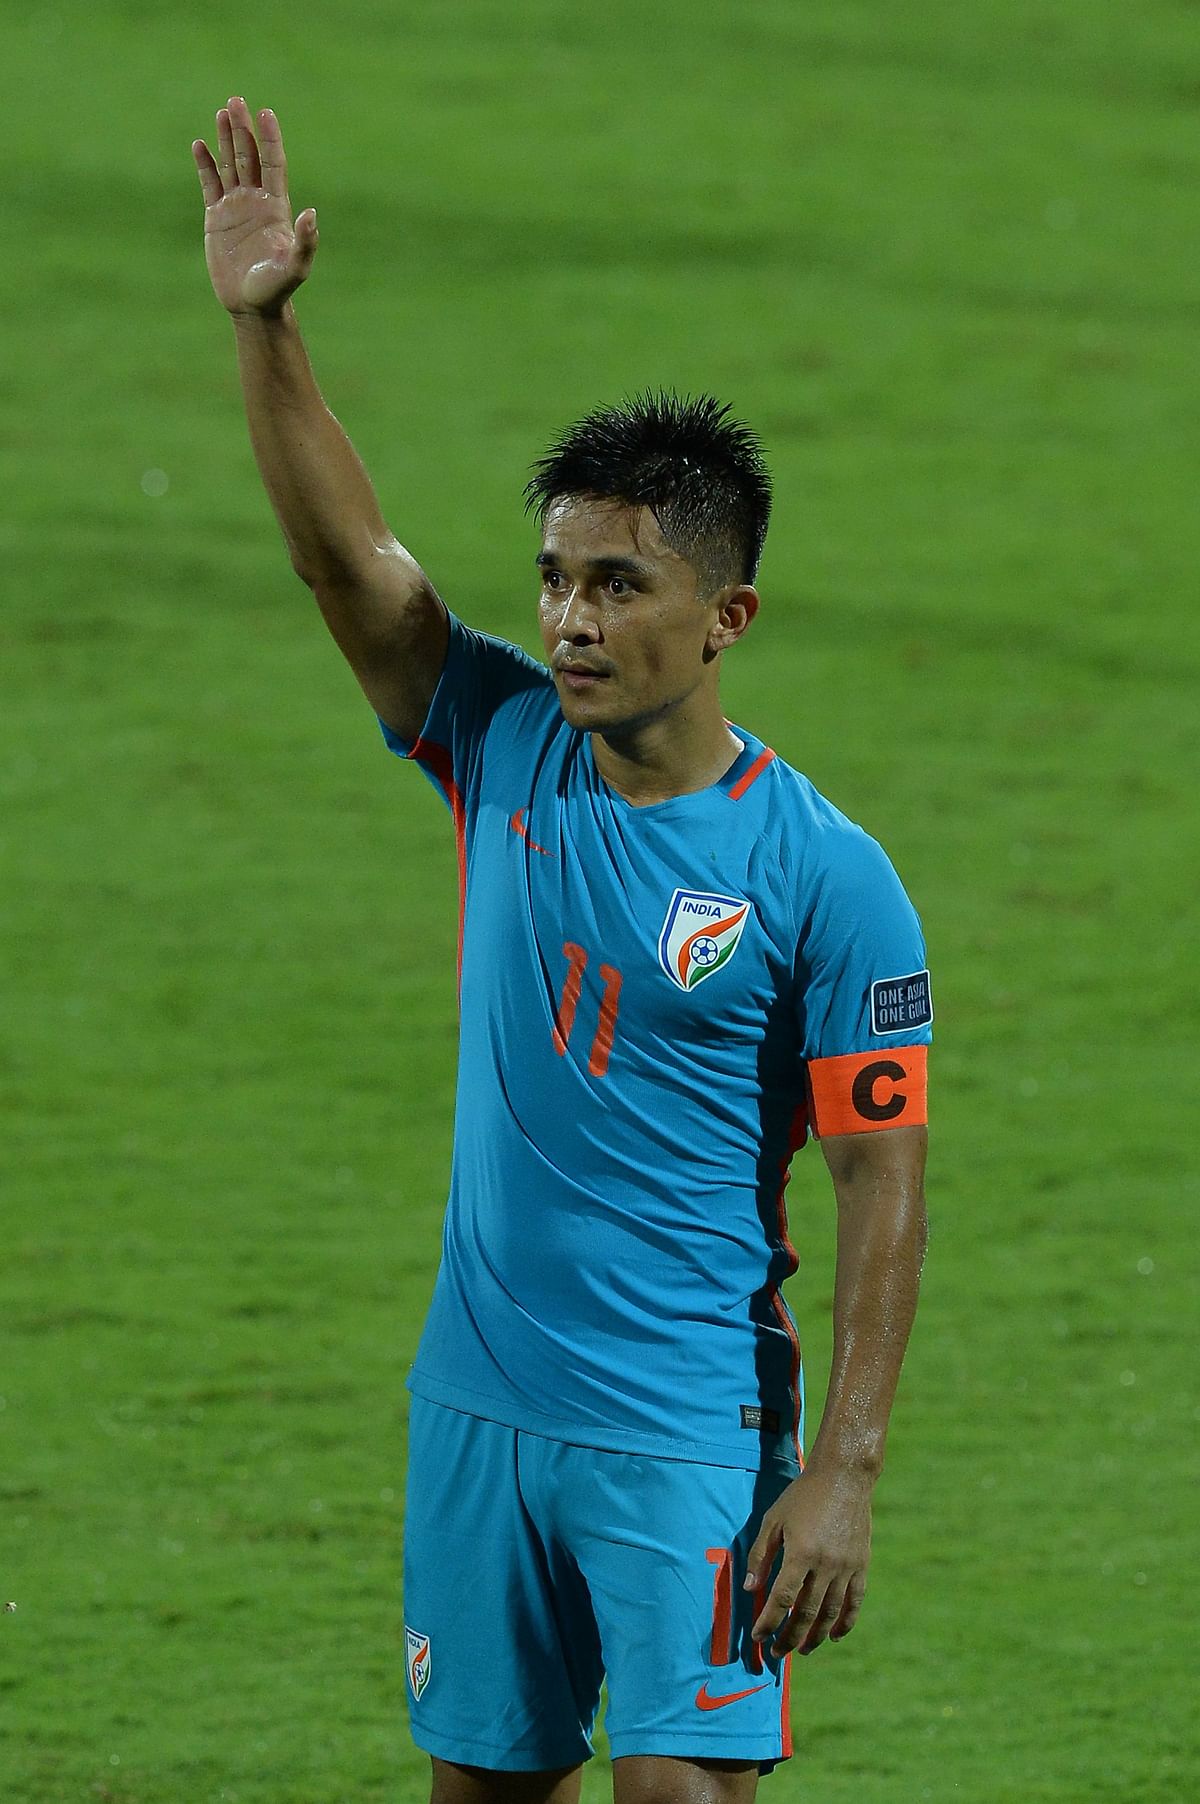 Indian football team captain Sunil Chhetri thanks the fans after the 4-1 victory over Macau during the 2019 AFC Asian Cup qualifying match at the Kanteerava Stadium in Bangalore on Wednesday. AFP